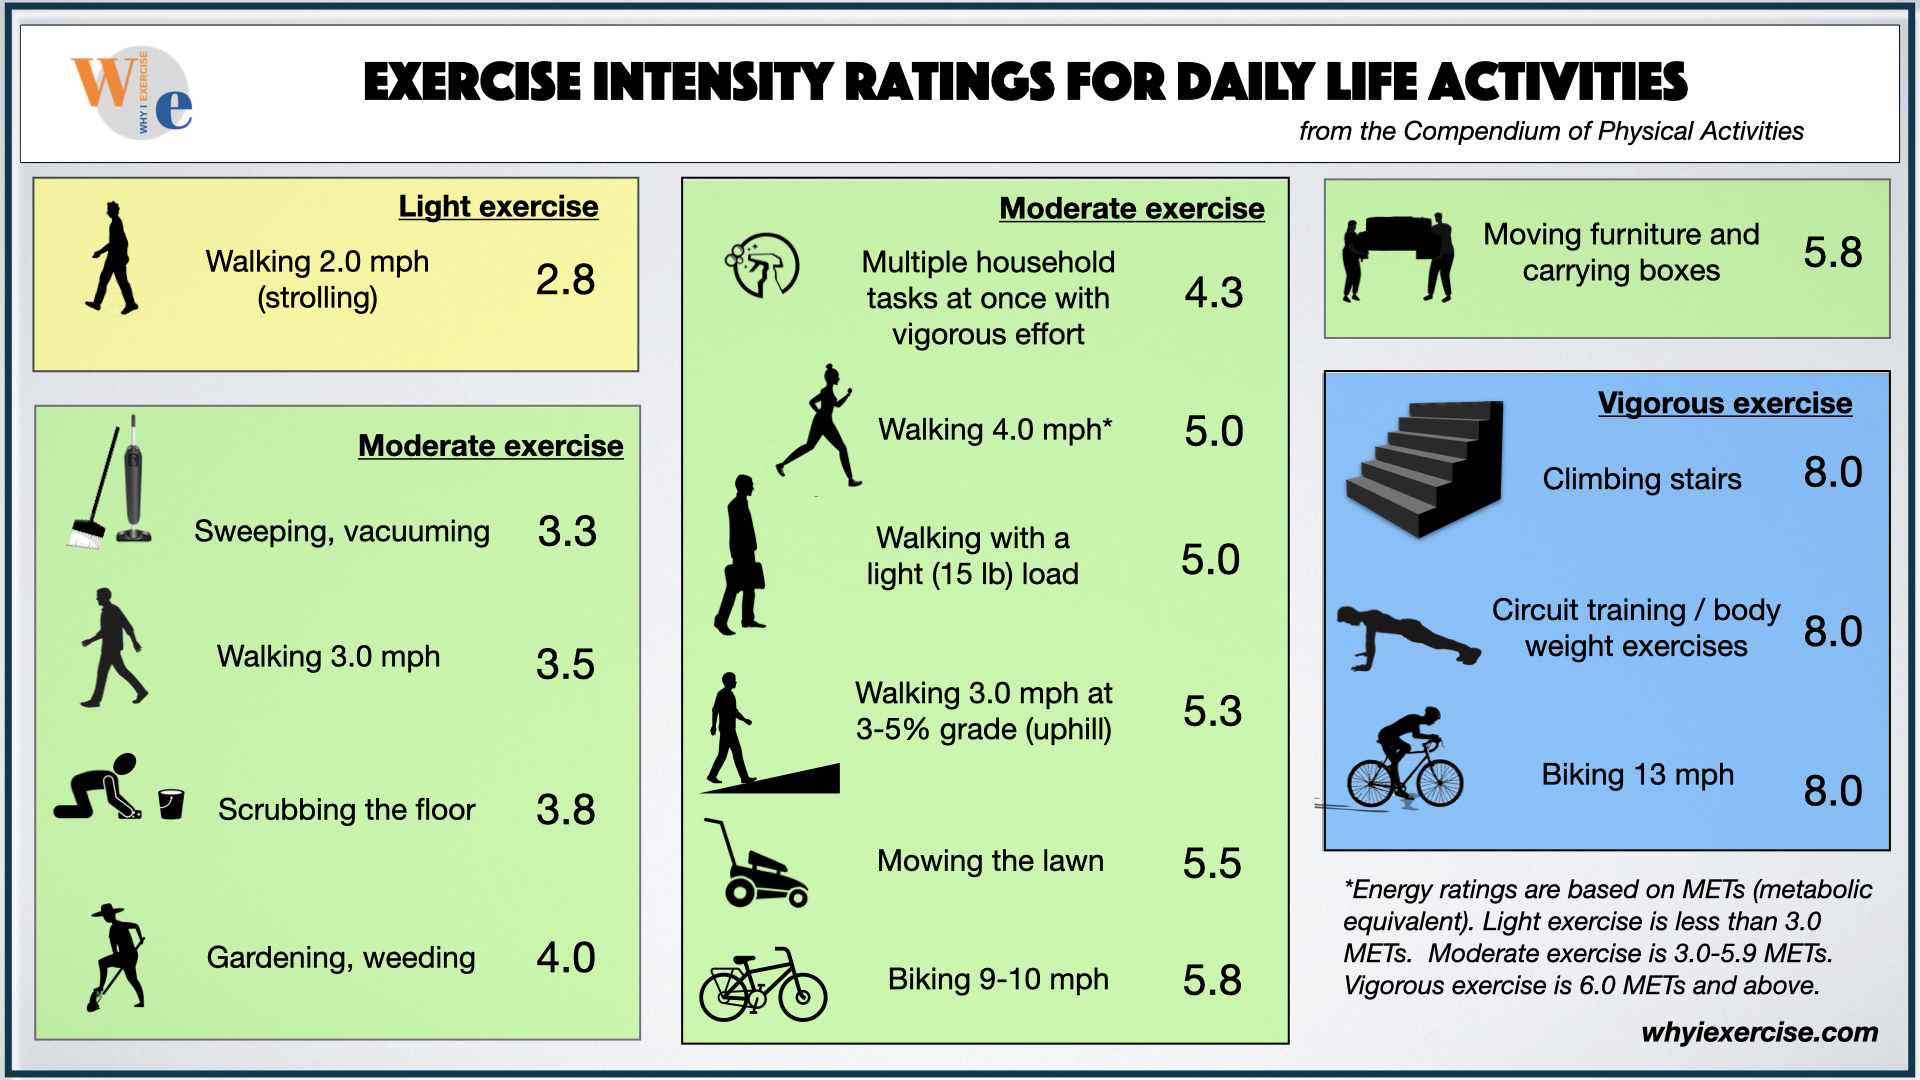 Exercise intensity for daily life activities.